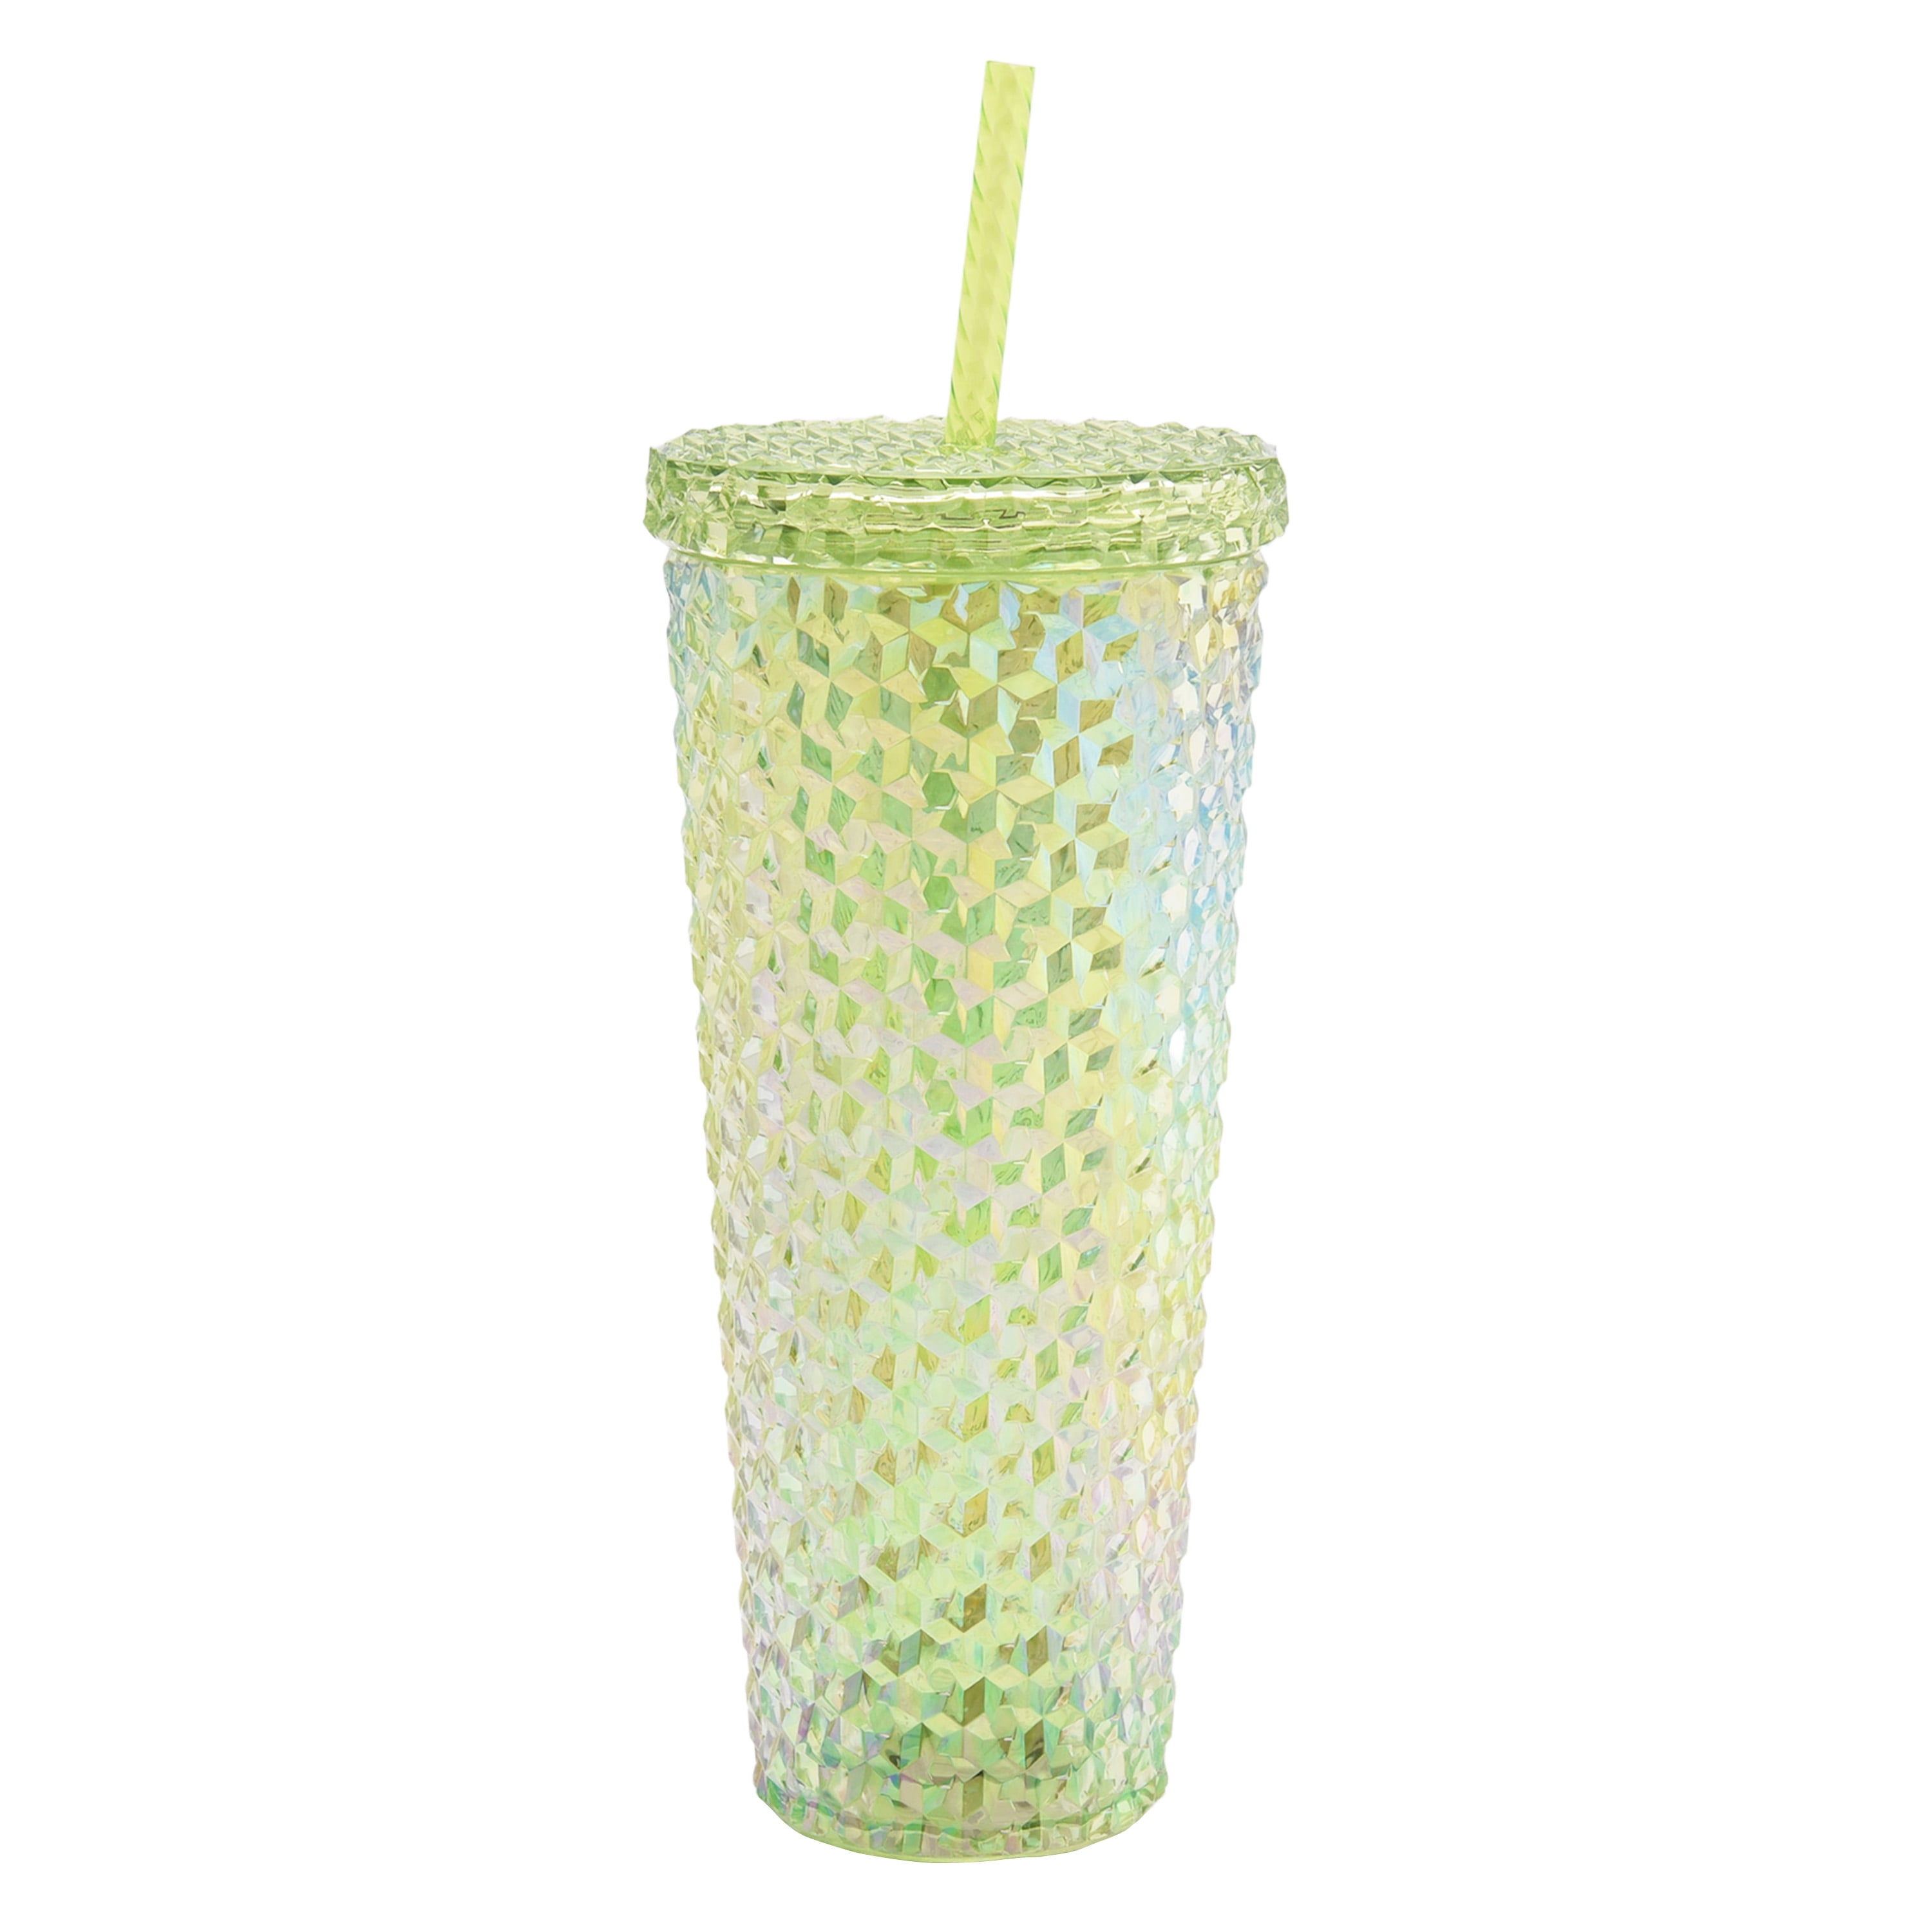 Mainstays 4-Pack 26-Ounce Textured Tumbler with Straw, Matte Blue